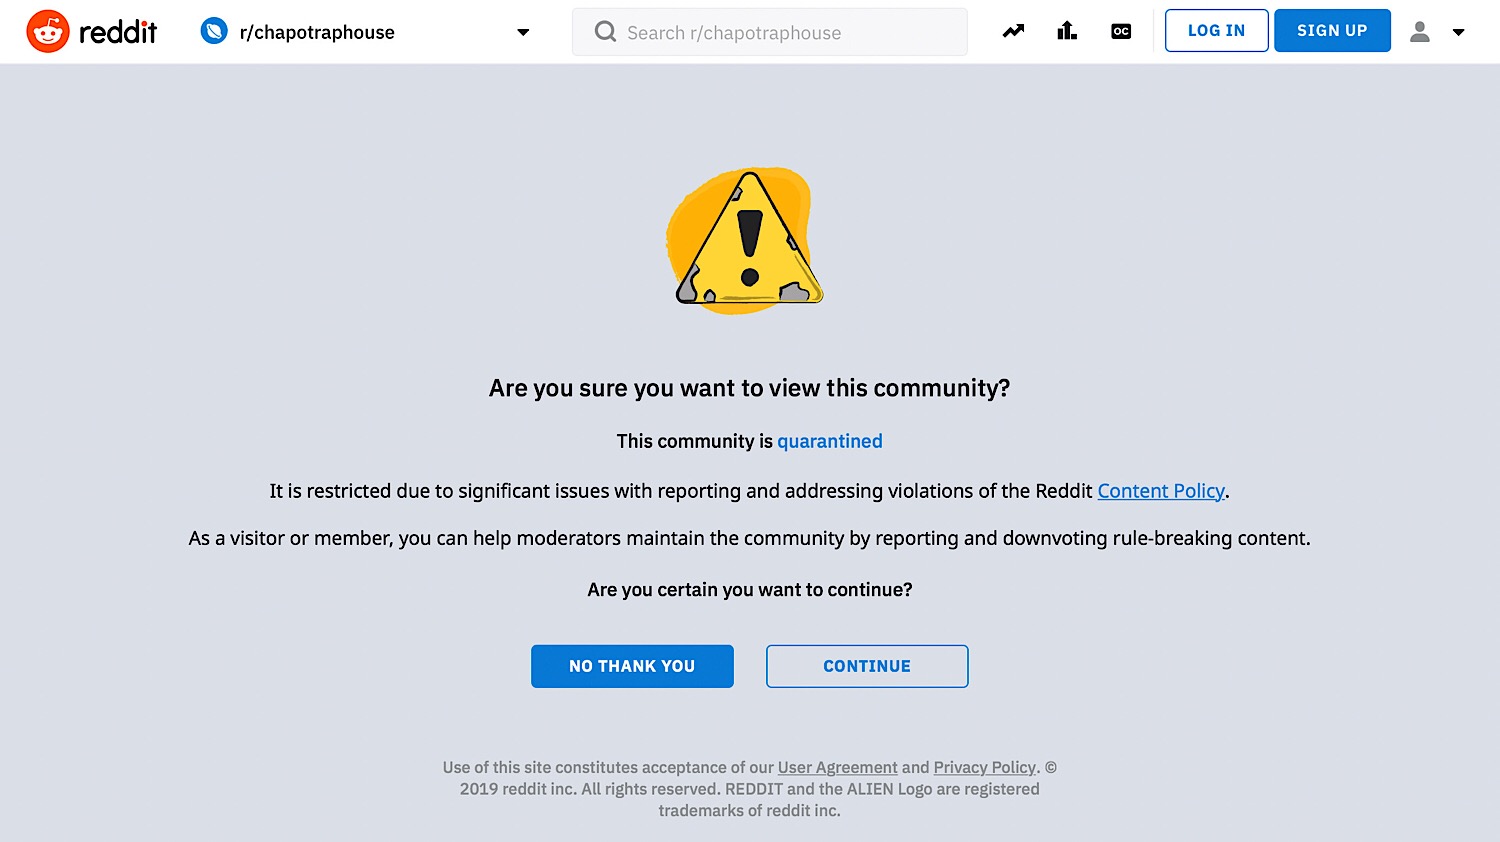 The warning message that appears when users attempt to access the Chapo Trap House subreddit.